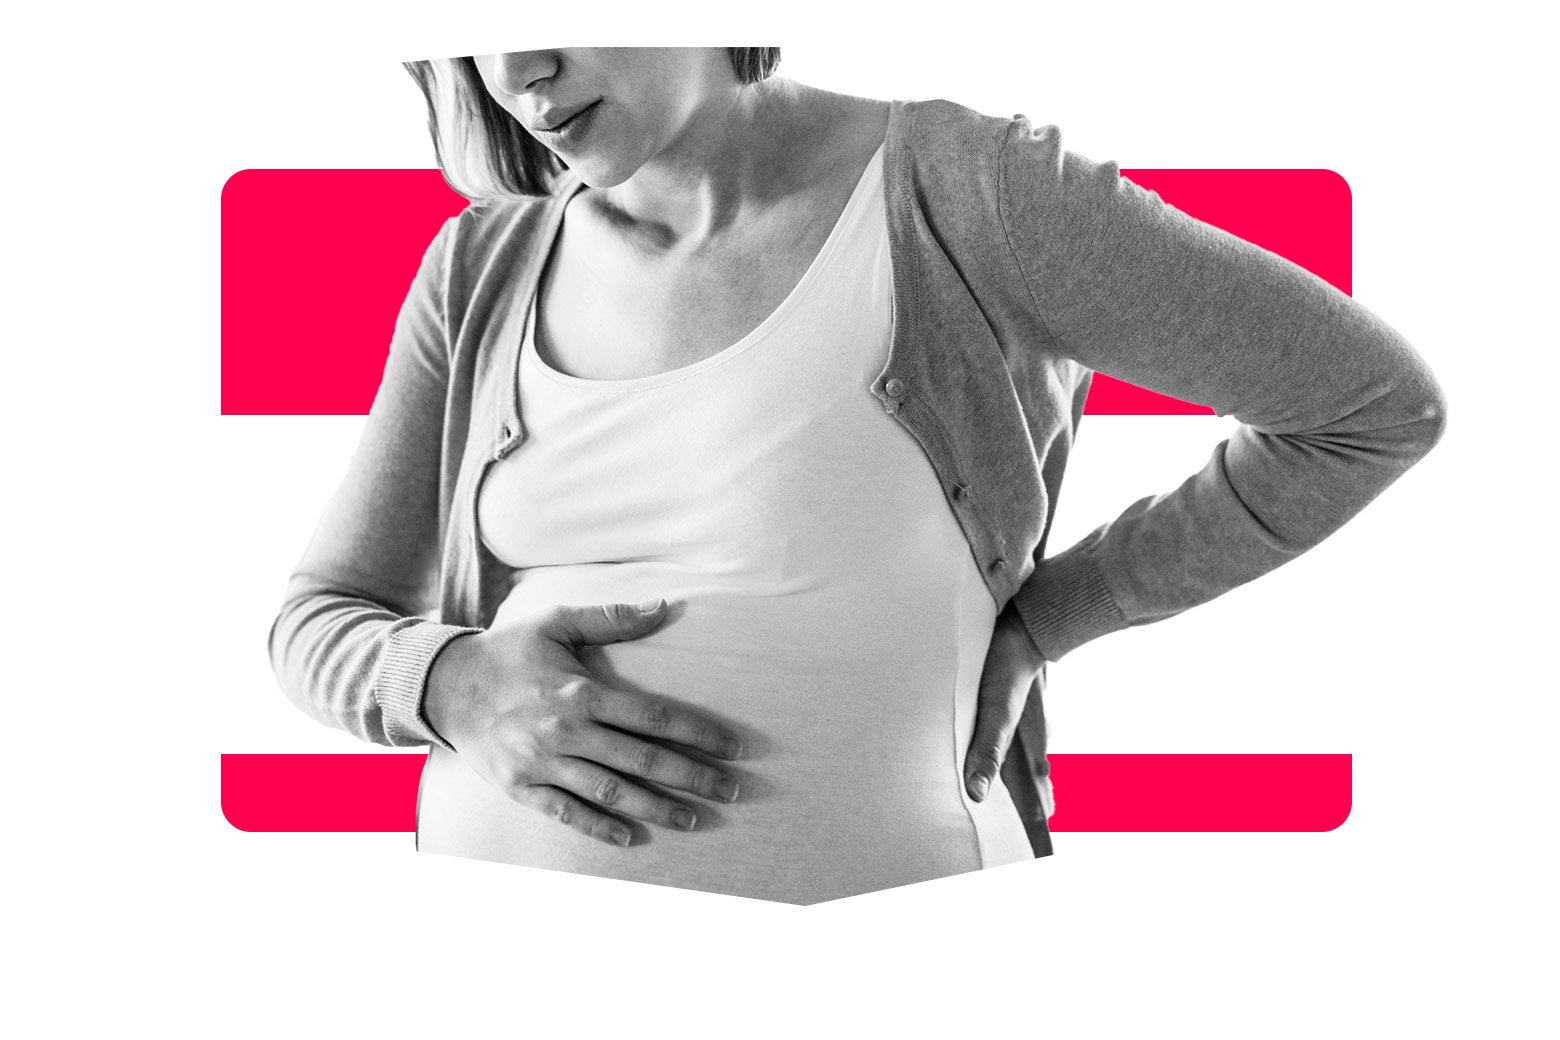 A pregnant woman holds her belly with one hand and her hip with the other hand in front of a nametag graphic